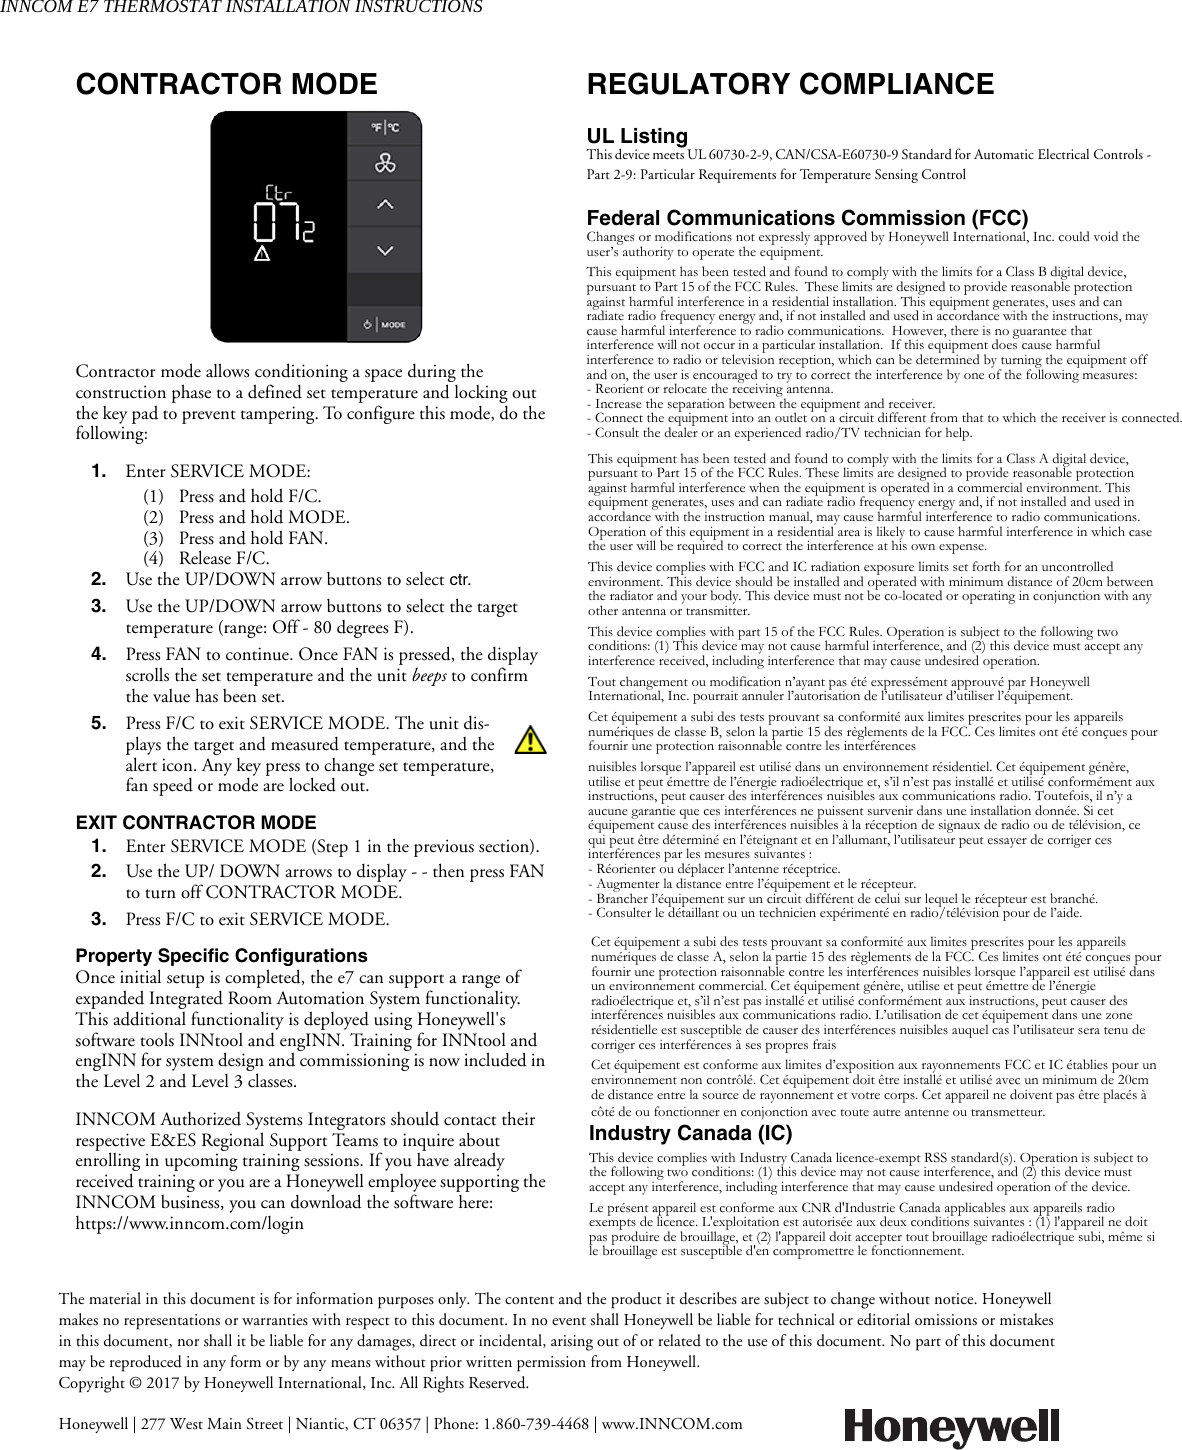 INNCOM E7 THERMOSTAT INSTALLATION INSTRUCTIONSThe material in this document is for information purposes only. The content and the product it describes are subject to change without notice. Honeywell makes no representations or warranties with respect to this document. In no event shall Honeywell be liable for technical or editorial omissions or mistakes in this document, nor shall it be liable for any damages, direct or incidental, arising out of or related to the use of this document. No part of this document may be reproduced in any form or by any means without prior written permission from Honeywell.Copyright © 2017 by Honeywell International, Inc. All Rights Reserved.Honeywell | 277 West Main Street | Niantic, CT 06357 | Phone: 1.860-739-4468 | www.INNCOM.comCONTRACTOR MODEContractor mode allows conditioning a space during the construction phase to a defined set temperature and locking out the key pad to prevent tampering. To configure this mode, do the following:1. Enter SERVICE MODE:(1) Press and hold F/C.(2) Press and hold MODE.(3) Press and hold FAN.(4) Release F/C.2. Use the UP/DOWN arrow buttons to select ctr.3. Use the UP/DOWN arrow buttons to select the targettemperature (range: Off - 80 degrees F).4. Press FAN to continue. Once FAN is pressed, the displayscrolls the set temperature and the unit beeps to confirmthe value has been set.5. Press F/C to exit SERVICE MODE. The unit dis-plays the target and measured temperature, and thealert icon. Any key press to change set temperature,fan speed or mode are locked out.EXIT CONTRACTOR MODE1. Enter SERVICE MODE (Step 1 in the previous section).2. Use the UP/ DOWN arrows to display - - then press FANto turn off CONTRACTOR MODE.3. Press F/C to exit SERVICE MODE.Property Specific ConfigurationsOnce initial setup is completed, the e7 can support a range of expanded Integrated Room Automation System functionality. This additional functionality is deployed using Honeywell&apos;s software tools INNtool and engINN. Training for INNtool and engINN for system design and commissioning is now included in the Level 2 and Level 3 classes. INNCOM Authorized Systems Integrators should contact their respective E&amp;ES Regional Support Teams to inquire about enrolling in upcoming training sessions. If you have already received training or you are a Honeywell employee supporting the INNCOM business, you can download the software here: https://www.inncom.com/loginREGULATORY COMPLIANCEUL ListingThis device meets UL 60730-2-9, CAN/CSA-E60730-9 Standard for Automatic Electrical Controls - Part 2-9: Particular Requirements for Temperature Sensing Control Federal Communications Commission (FCC)Changes or modifications not expressly approved by Honeywell International, Inc. could void the user’s authority to operate the equipment.This equipment has been tested and found to comply with the limits for a Class B digital device, pursuant to Part 15 of the FCC Rules.  These limits are designed to provide reasonable protection against harmful interference in a residential installation. This equipment generates, uses and can radiate radio frequency energy and, if not installed and used in accordance with the instructions, may cause harmful interference to radio communications.  However, there is no guarantee that interference will not occur in a particular installation.  If this equipment does cause harmful interference to radio or television reception, which can be determined by turning the equipment off and on, the user is encouraged to try to correct the interference by one of the following measures:- Reorient or relocate the receiving antenna.- Increase the separation between the equipment and receiver.- Connect the equipment into an outlet on a circuit different from that to which the receiver is connected.- Consult the dealer or an experienced radio/TV technician for help. This equipment has been tested and found to comply with the limits for a Class A digital device, pursuant to Part 15 of the FCC Rules. These limits are designed to provide reasonable protection against harmful interference when the equipment is operated in a commercial environment. This equipment generates, uses and can radiate radio frequency energy and, if not installed and used in accordance with the instruction manual, may cause harmful interference to radio communications. Operation of this equipment in a residential area is likely to cause harmful interference in which case the user will be required to correct the interference at his own expense.This device complies with FCC and IC radiation exposure limits set forth for an uncontrolled environment. This device should be installed and operated with minimum distance of 20cm between the radiator and your body. This device must not be co-located or operating in conjunction with any other antenna or transmitter.This device complies with part 15 of the FCC Rules. Operation is subject to the following two conditions: (1) This device may not cause harmful interference, and (2) this device must accept any interference received, including interference that may cause undesired operation.Tout changement ou modification n’ayant pas été expressément approuvé par Honeywell International, Inc. pourrait annuler l’autorisation de l’utilisateur d’utiliser l’équipement.Cet équipement a subi des tests prouvant sa conformité aux limites prescrites pour les appareils numériques de classe B, selon la partie 15 des règlements de la FCC. Ces limites ont été conçues pour fournir une protection raisonnable contre les interférencesnuisibles lorsque l’appareil est utilisé dans un environnement résidentiel. Cet équipement génère, utilise et peut émettre de l’énergie radioélectrique et, s’il n’est pas installé et utilisé conformément aux instructions, peut causer des interférences nuisibles aux communications radio. Toutefois, il n’y a aucune garantie que ces interférences ne puissent survenir dans une installation donnée. Si cet équipement cause des interférences nuisibles à la réception de signaux de radio ou de télévision, ce qui peut être déterminé en l’éteignant et en l’allumant, l’utilisateur peut essayer de corriger ces interférences par les mesures suivantes :- Réorienter ou déplacer l’antenne réceptrice.- Augmenter la distance entre l’équipement et le récepteur.- Brancher l’équipement sur un circuit différent de celui sur lequel le récepteur est branché.- Consulter le détaillant ou un technicien expérimenté en radio/télévision pour de l’aide. Cet équipement a subi des tests prouvant sa conformité aux limites prescrites pour les appareils numériques de classe A, selon la partie 15 des règlements de la FCC. Ces limites ont été conçues pour fournir une protection raisonnable contre les interférences nuisibles lorsque l’appareil est utilisé dans un environnement commercial. Cet équipement génère, utilise et peut émettre de l’énergie radioélectrique et, s’il n’est pas installé et utilisé conformément aux instructions, peut causer des interférences nuisibles aux communications radio. L’utilisation de cet équipement dans une zone résidentielle est susceptible de causer des interférences nuisibles auquel cas l’utilisateur sera tenu de corriger ces interférences à ses propres fraisCet équipement est conforme aux limites d’exposition aux rayonnements FCC et IC établies pour un environnement non contrôlé. Cet équipement doit être installé et utilisé avec un minimum de 20cm de distance entre la source de rayonnement et votre corps. Cet appareil ne doivent pas être placés à côté de ou fonctionner en conjonction avec toute autre antenne ou transmetteur.Industry Canada (IC) This device complies with Industry Canada licence-exempt RSS standard(s). Operation is subject to the following two conditions: (1) this device may not cause interference, and (2) this device must accept any interference, including interference that may cause undesired operation of the device.Le présent appareil est conforme aux CNR d&apos;Industrie Canada applicables aux appareils radio exempts de licence. L&apos;exploitation est autorisée aux deux conditions suivantes : (1) l&apos;appareil ne doit pas produire de brouillage, et (2) l&apos;appareil doit accepter tout brouillage radioélectrique subi, même si le brouillage est susceptible d&apos;en compromettre le fonctionnement.